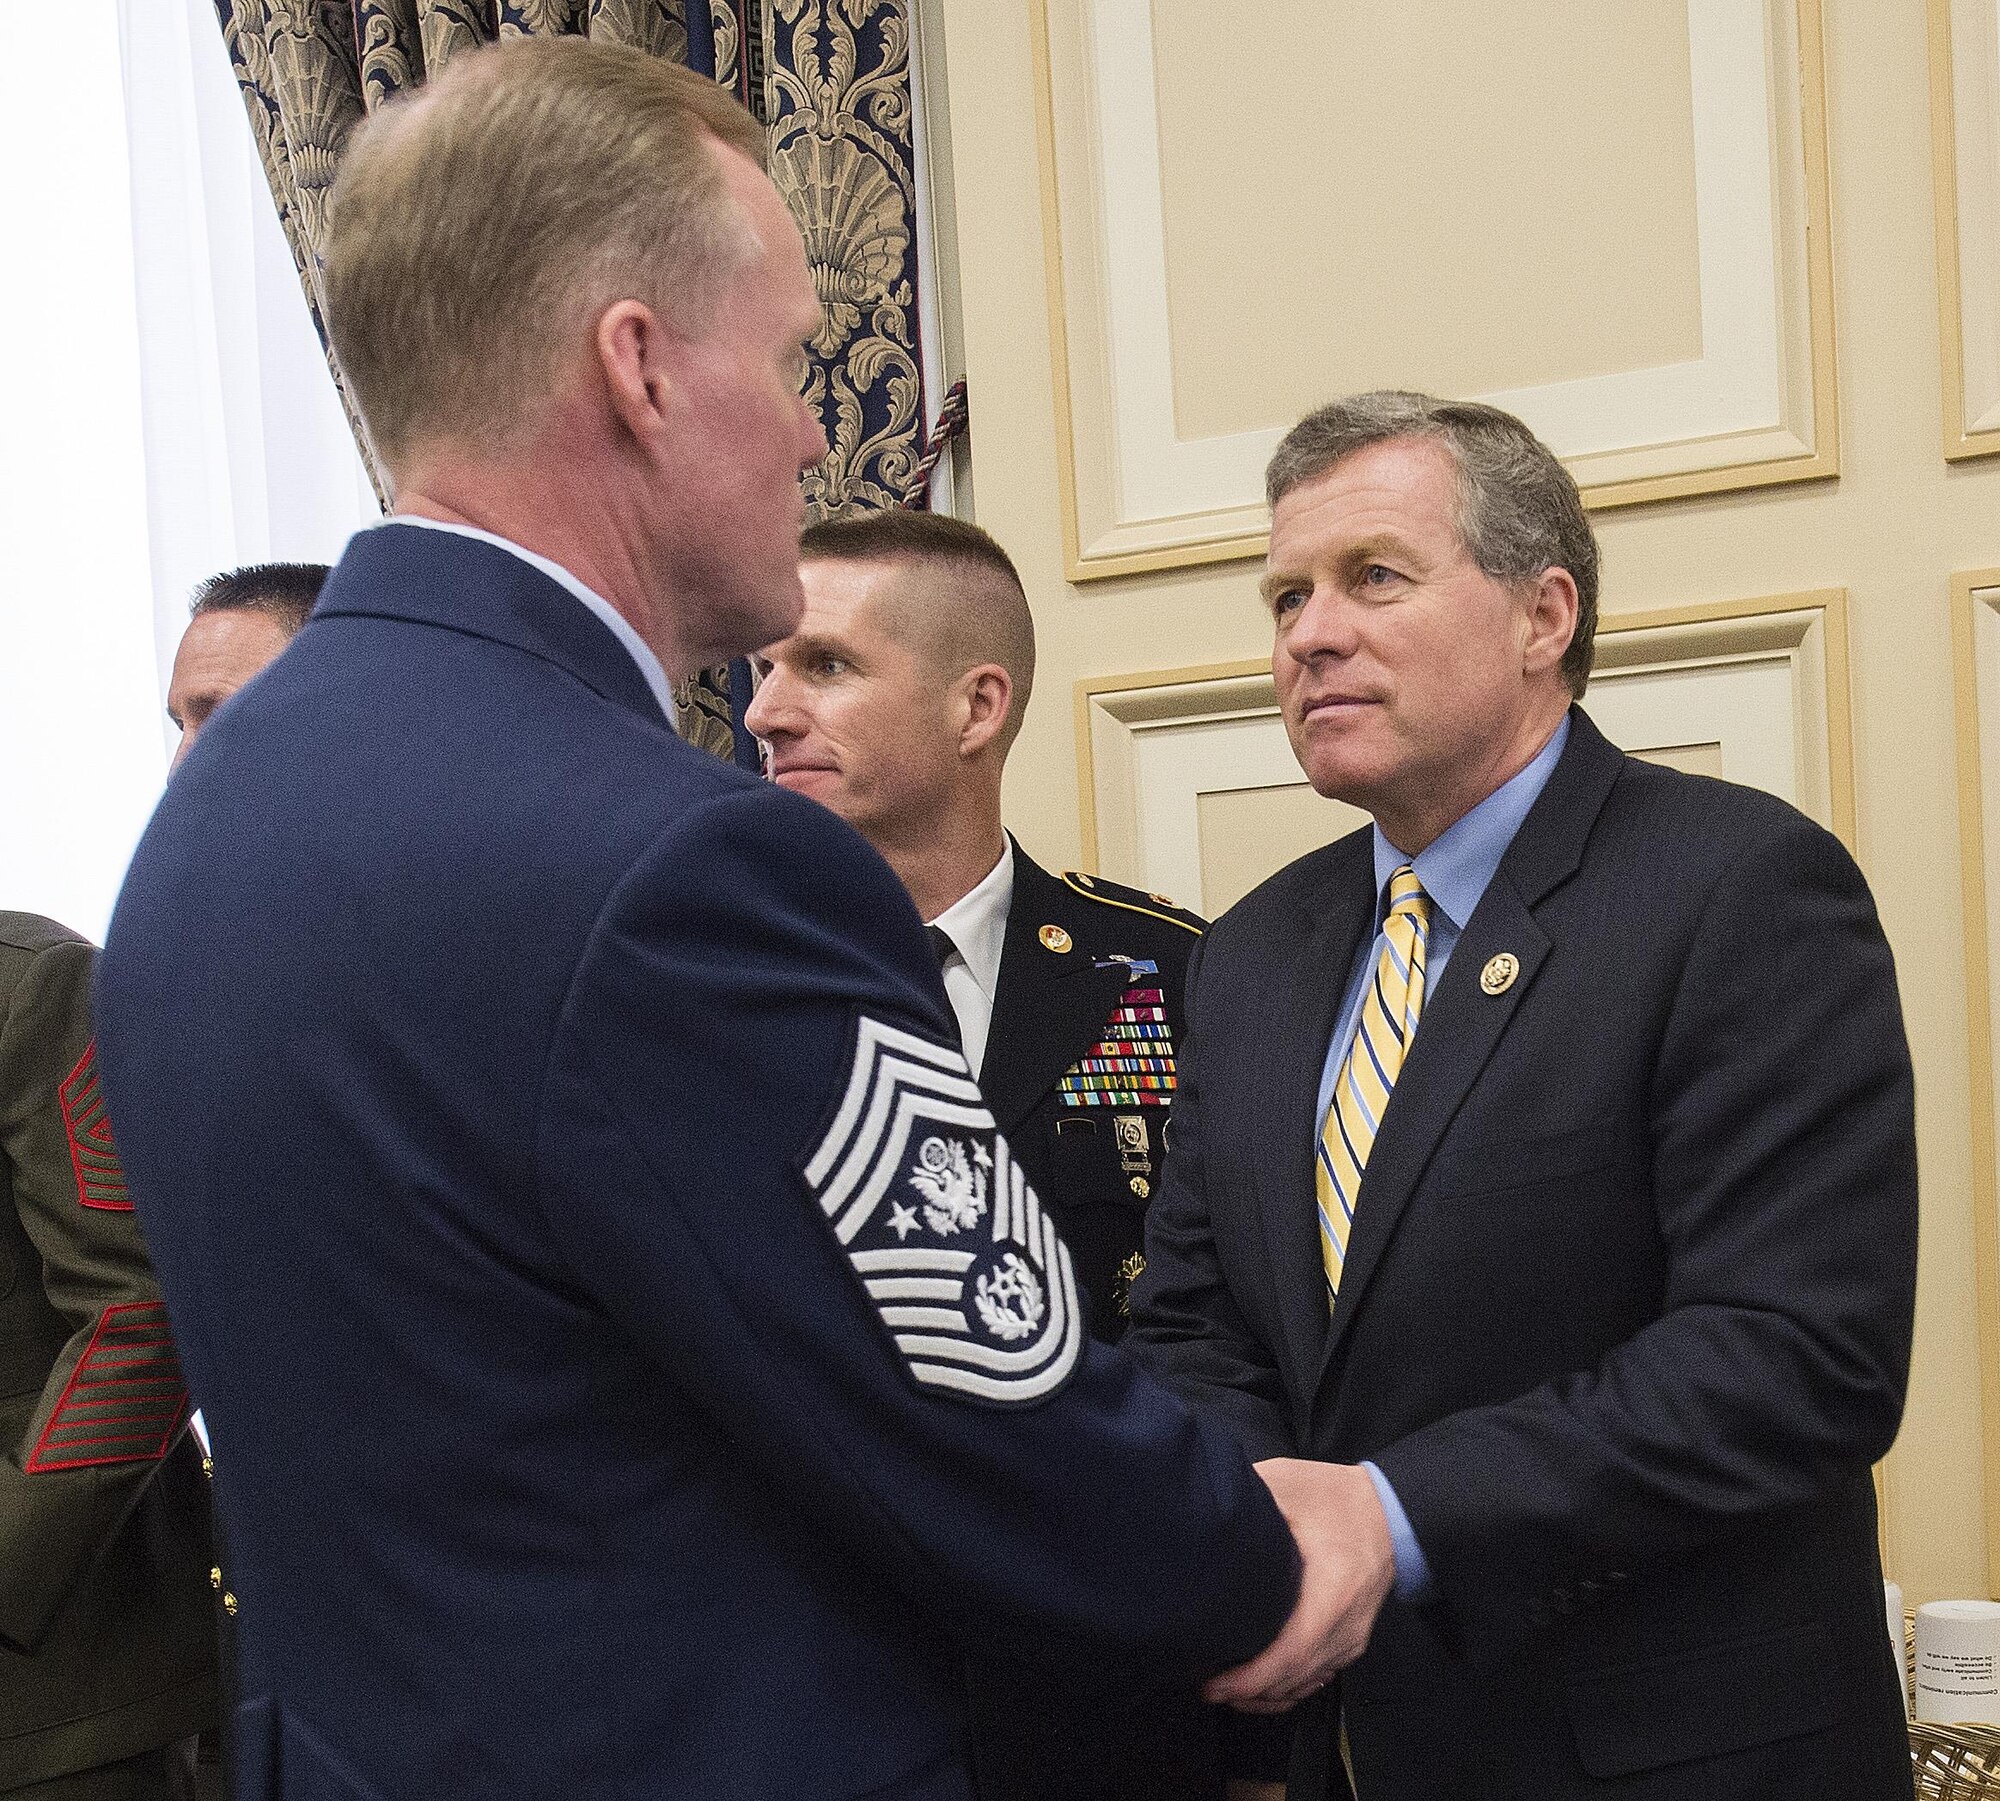 Chief Master Sgt. of the Air Force James A. Cody talks with Rep. Charlie Dent (R-Pa.) following a hearing on Capitol Hill before the House Appropriations Committee’s Subcommittee on Military Construction and Veterans Affairs Feb. 26, 2016, in Washington, D.C. Dent chairs the subcommittee. The oversight hearing was being held to learn about quality of life in the military concerns from each of the service's senior most enlisted members. During his opening statement Cody stressed the cumulative impacts of sequestered and reduced budgets on the compensation and quality of life of Airmen and their families. Cody stressed that the Airmen who serve today do so freely, proudly and voluntarily because they believe in what America stands for and are ready to defend its cause. He added that our nation must honor that commitment by providing for them and their families. (U.S. Air Force photo/Jim Varhegyi)